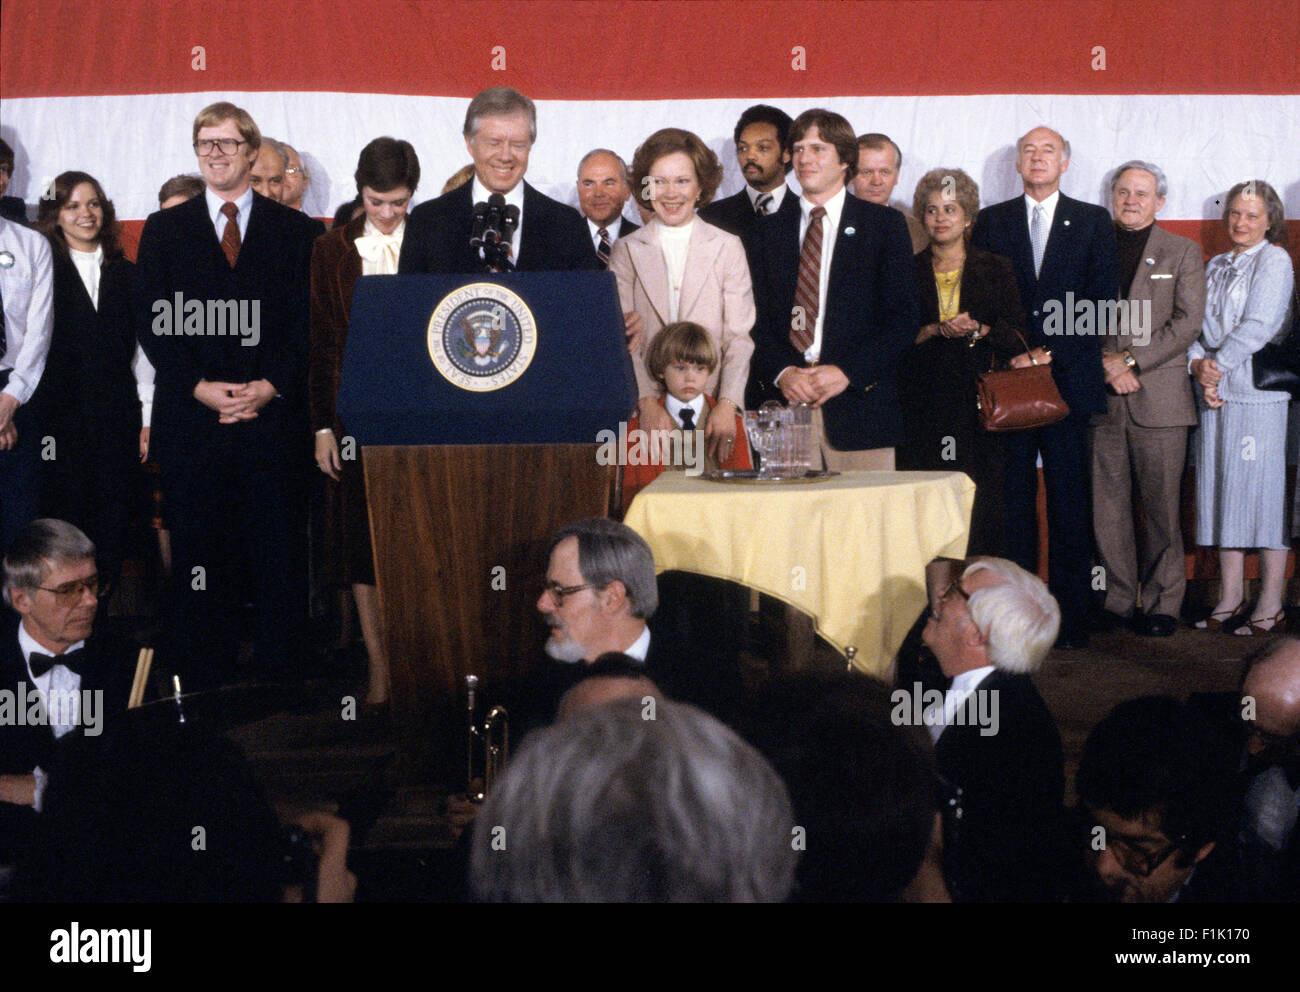 Members of the Carter family including first lady Rosalynn Carter look on as United States President Jimmy Carter makes remarks conceding the election to Republican Ronald Reagan at the Sheraton Washington Hotel in Washington, DC on November 4, 1980. Credit: Benjamin E. 'Gene' Forte/CNP - NO WIRE SERVICE - Stock Photo